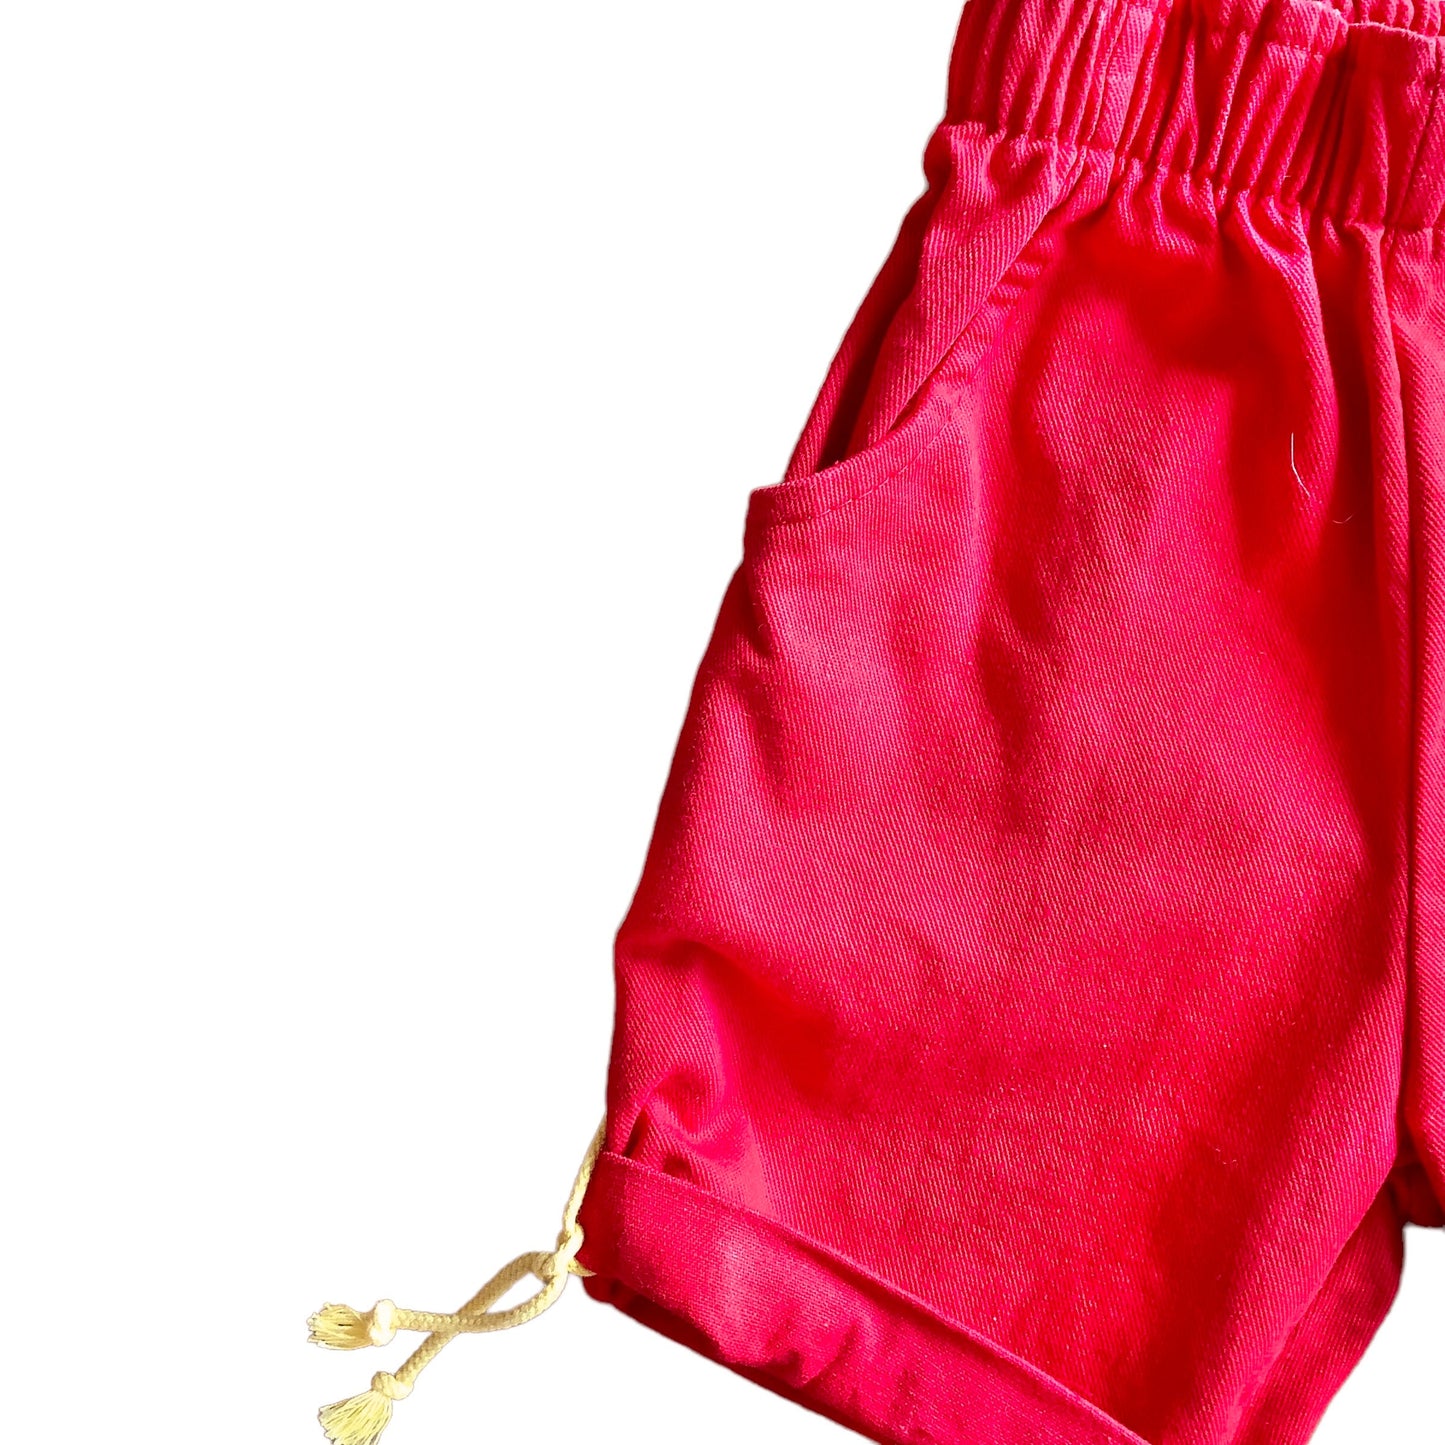 Vintage 70's Red  Shorts / 9-12M